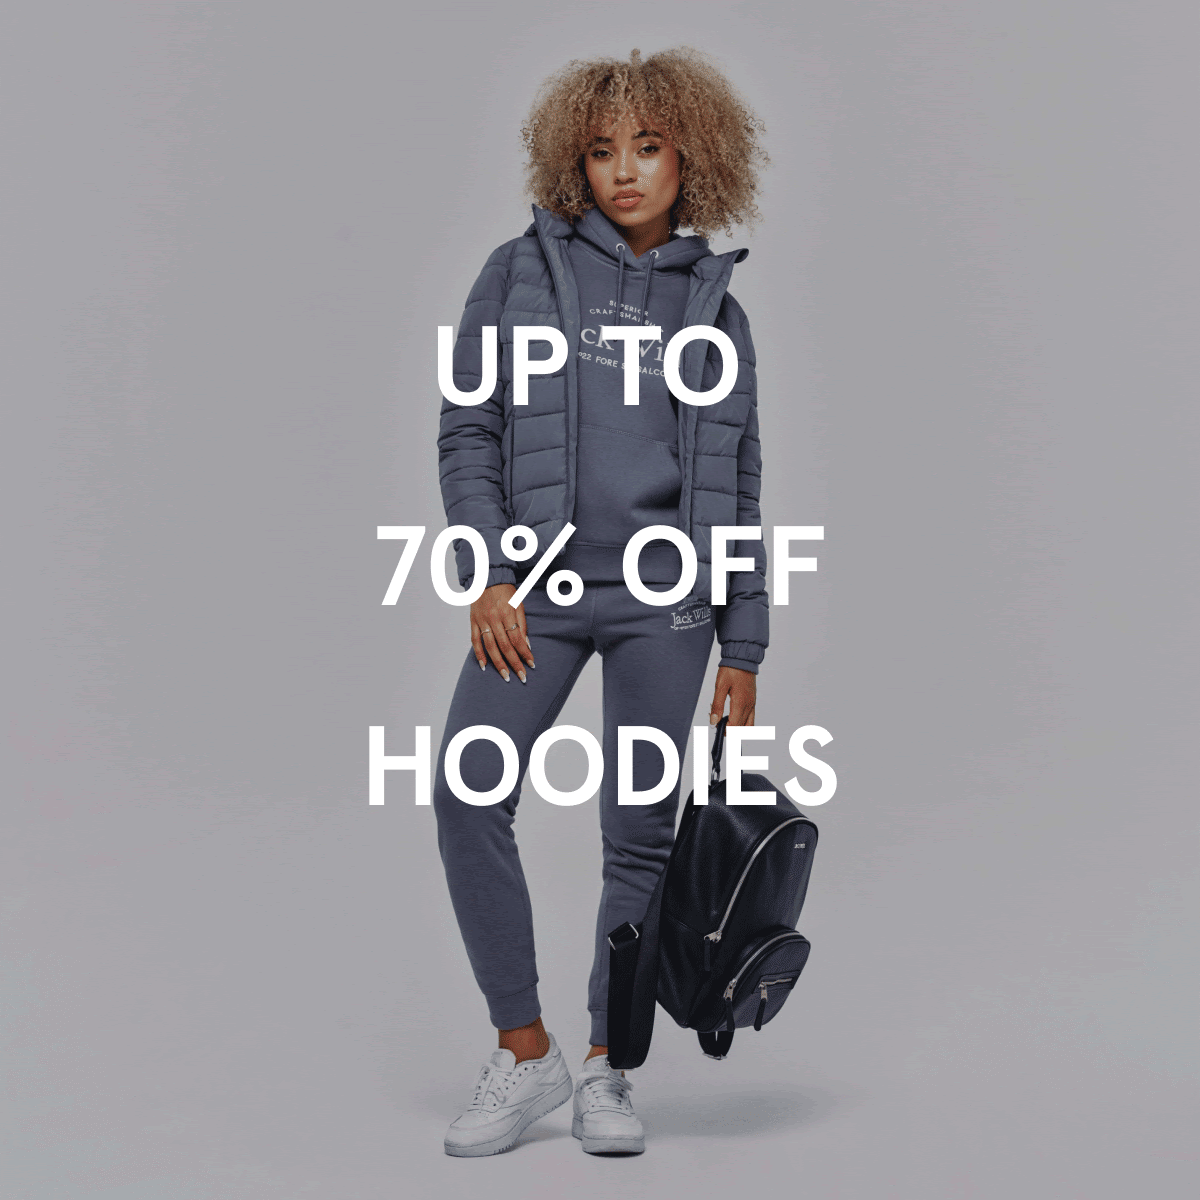 Jack Wills Up to 70 off Hoodies Joggers Black Friday 2